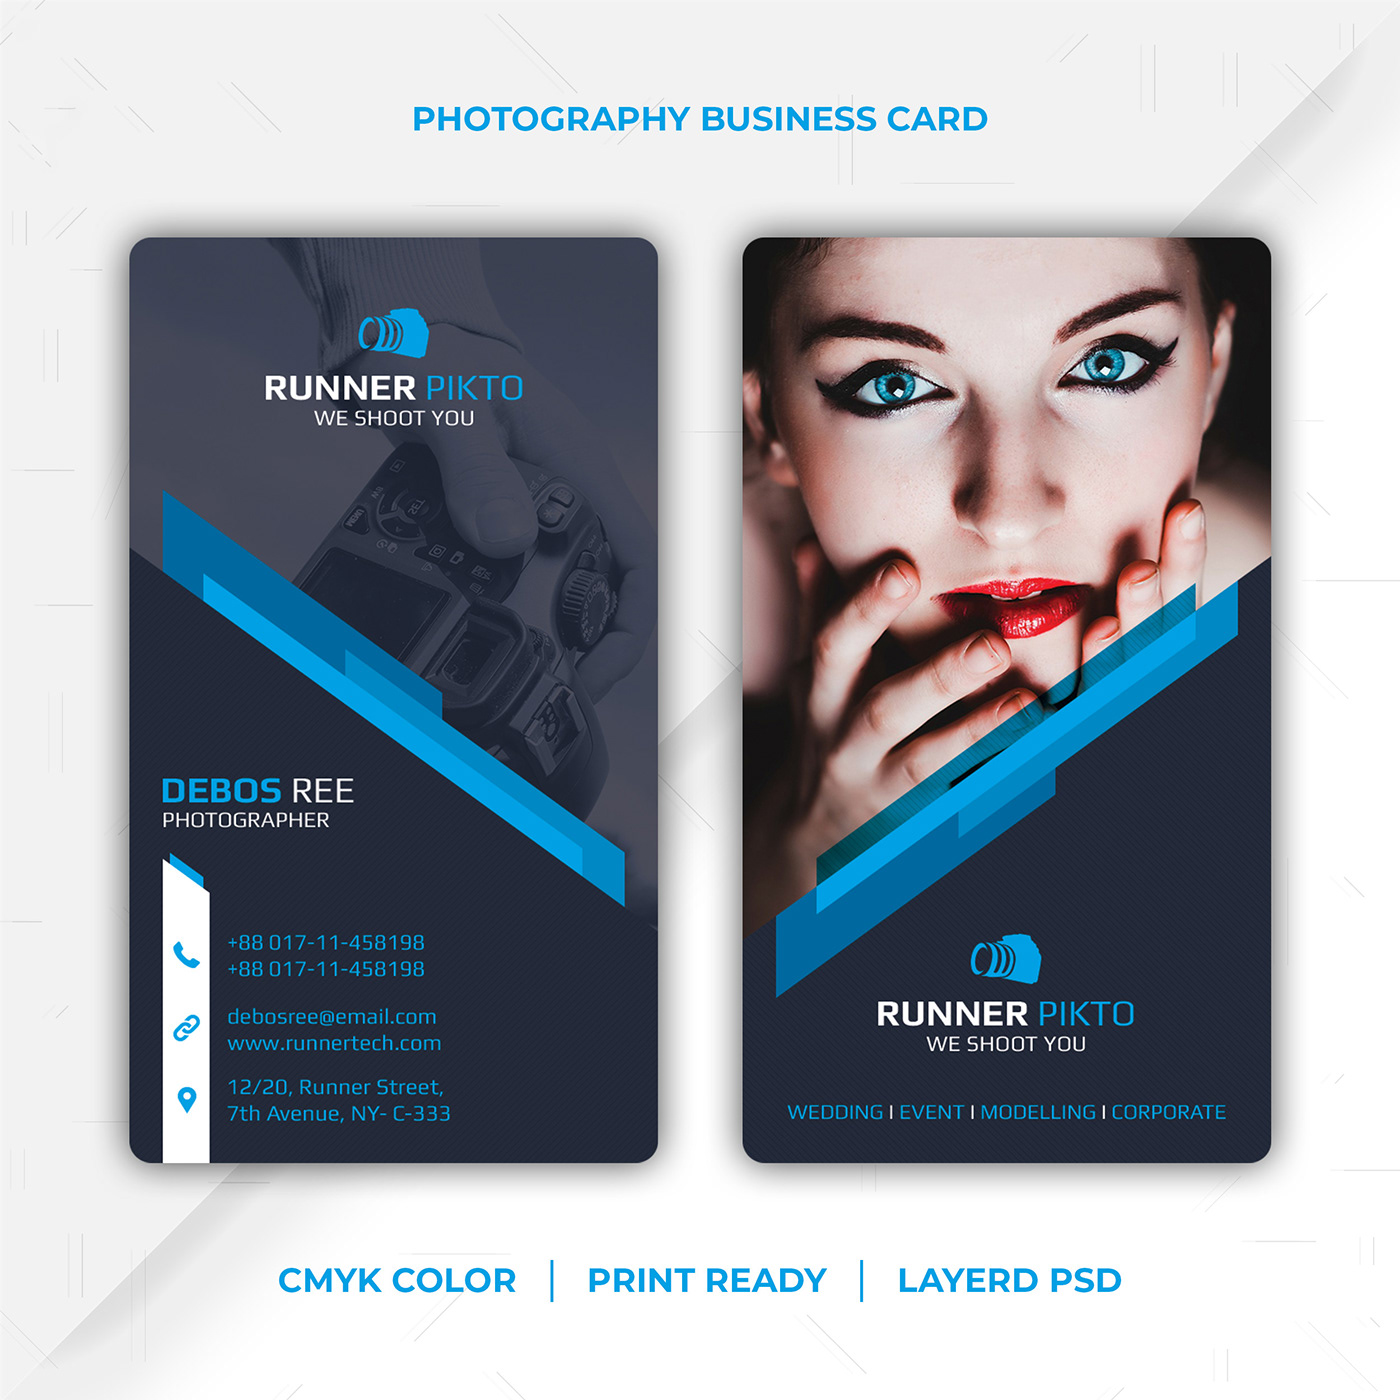 Photography Business Card on Behance Throughout Photography Business Card Template Photoshop